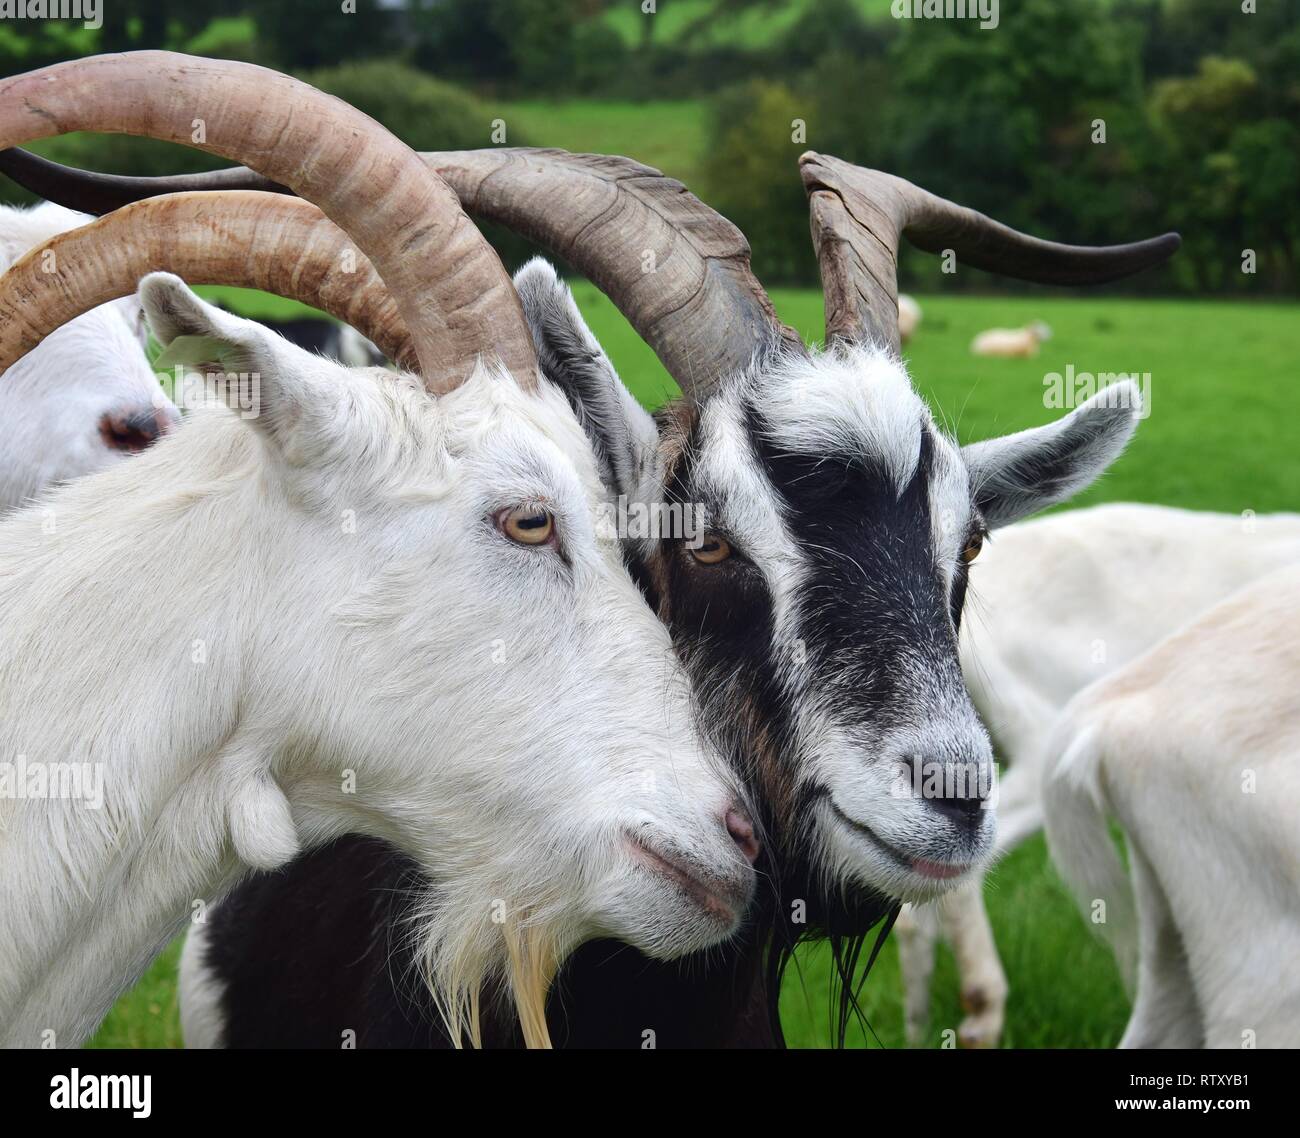 Two male goats putting their heads together, one white and one black-white. Ireland. Stock Photo